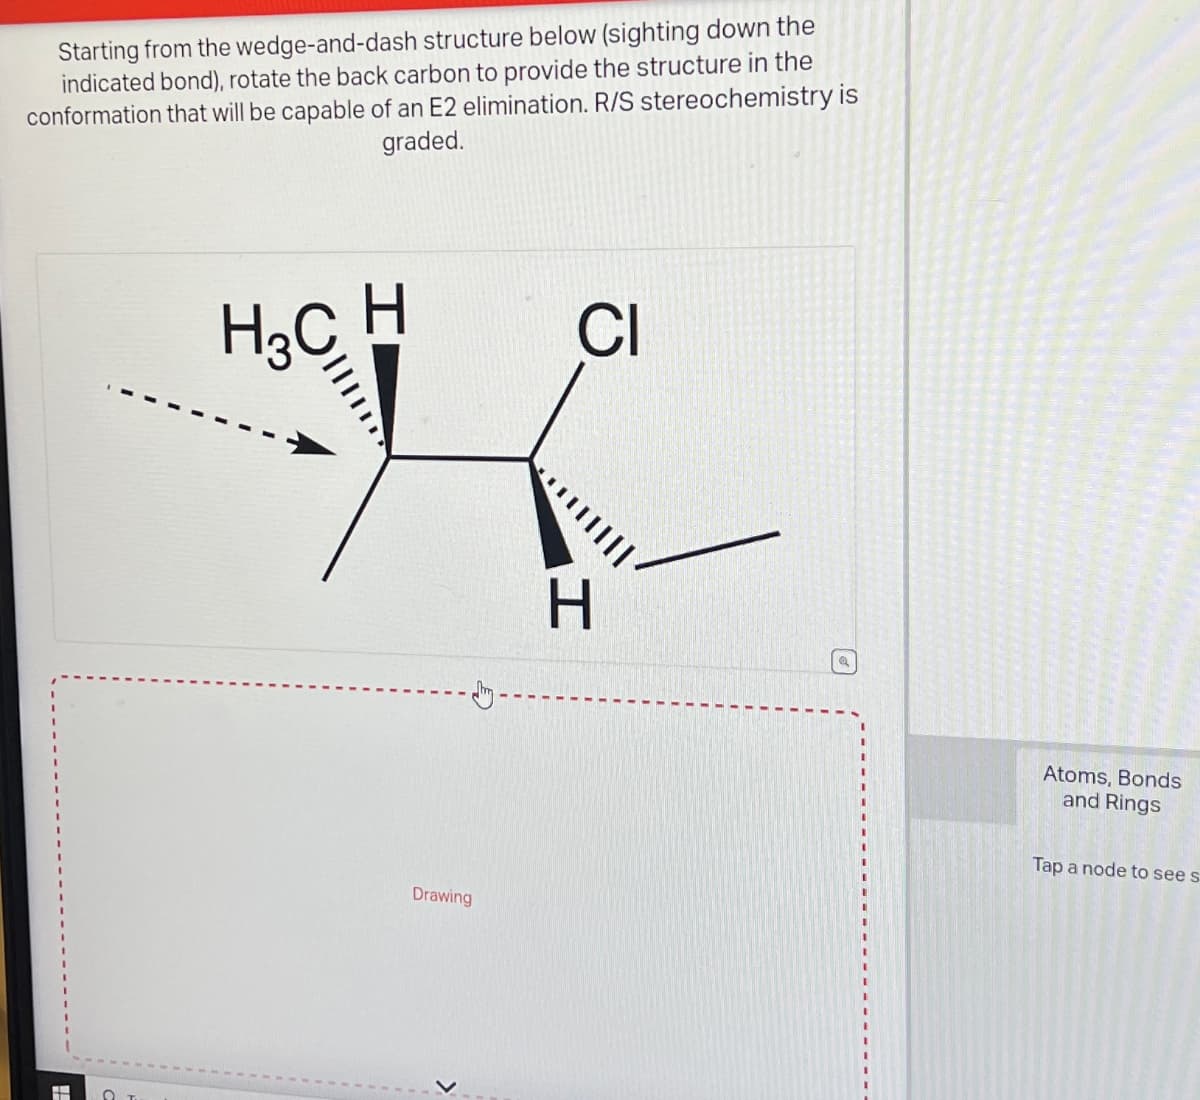 Starting from the wedge-and-dash structure below (sighting down the
indicated bond), rotate the back carbon to provide the structure in the
conformation that will be capable of an E2 elimination. R/S stereochemistry is
graded.
#
O
H3C H
Drawing
>
CI
|||||
H
Atoms, Bonds
and Rings
Tap a node to see s